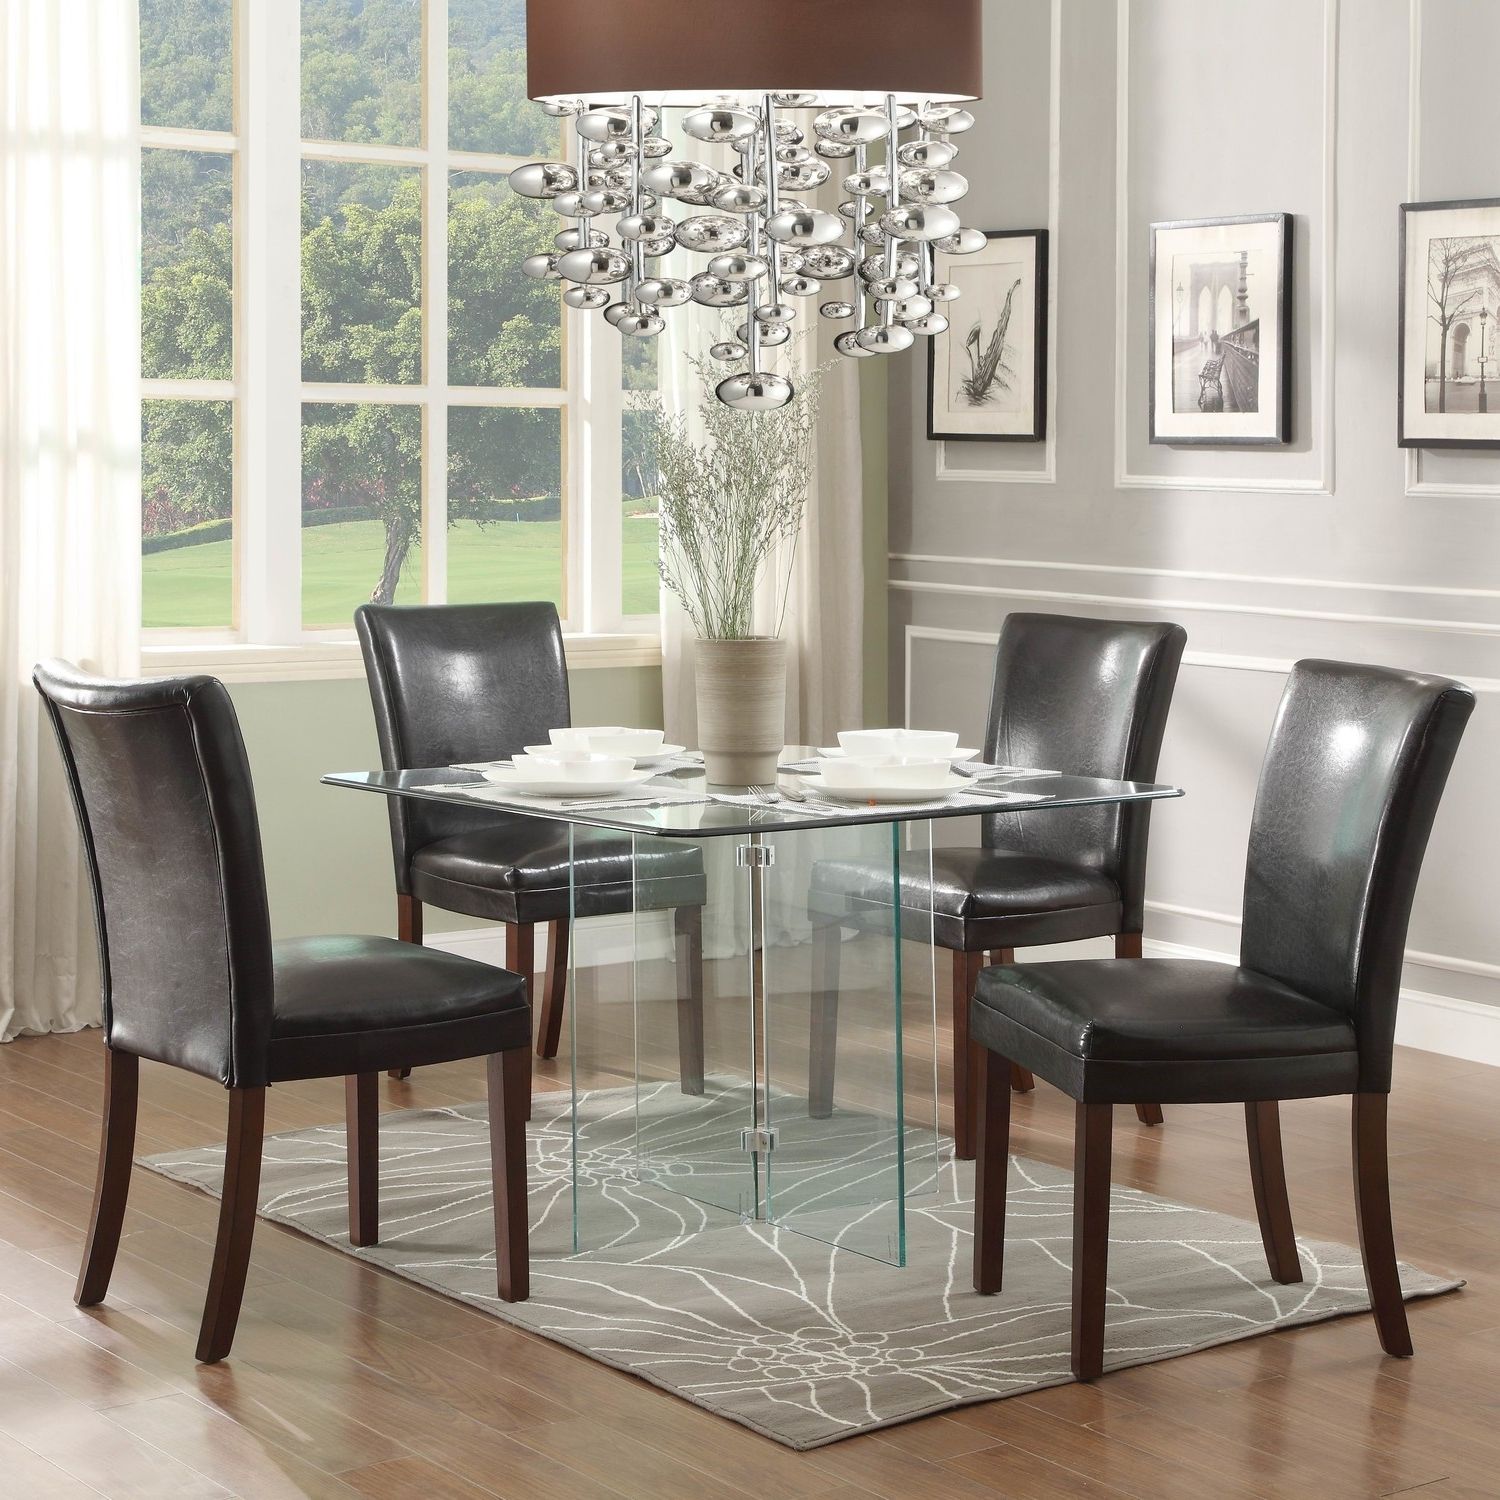 Crystal Dining Tables Throughout Most Recently Released Black Leather Dining Chair And Glass Dining Table Plus Unique Glass (View 23 of 25)